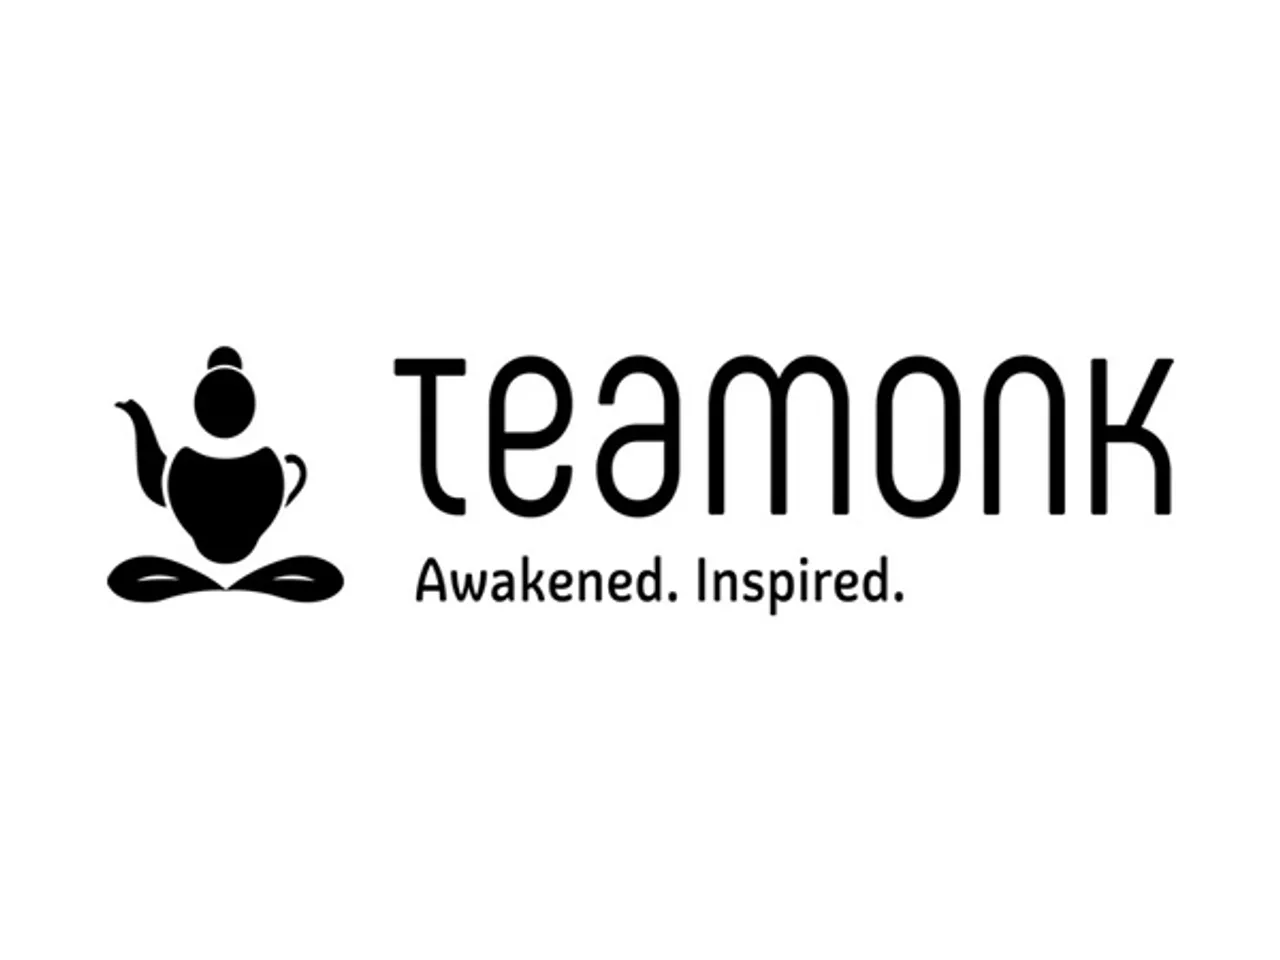 Teamonk raises Rs 3.5 crore in a pre-Series A round led by Inflection Point Ventures